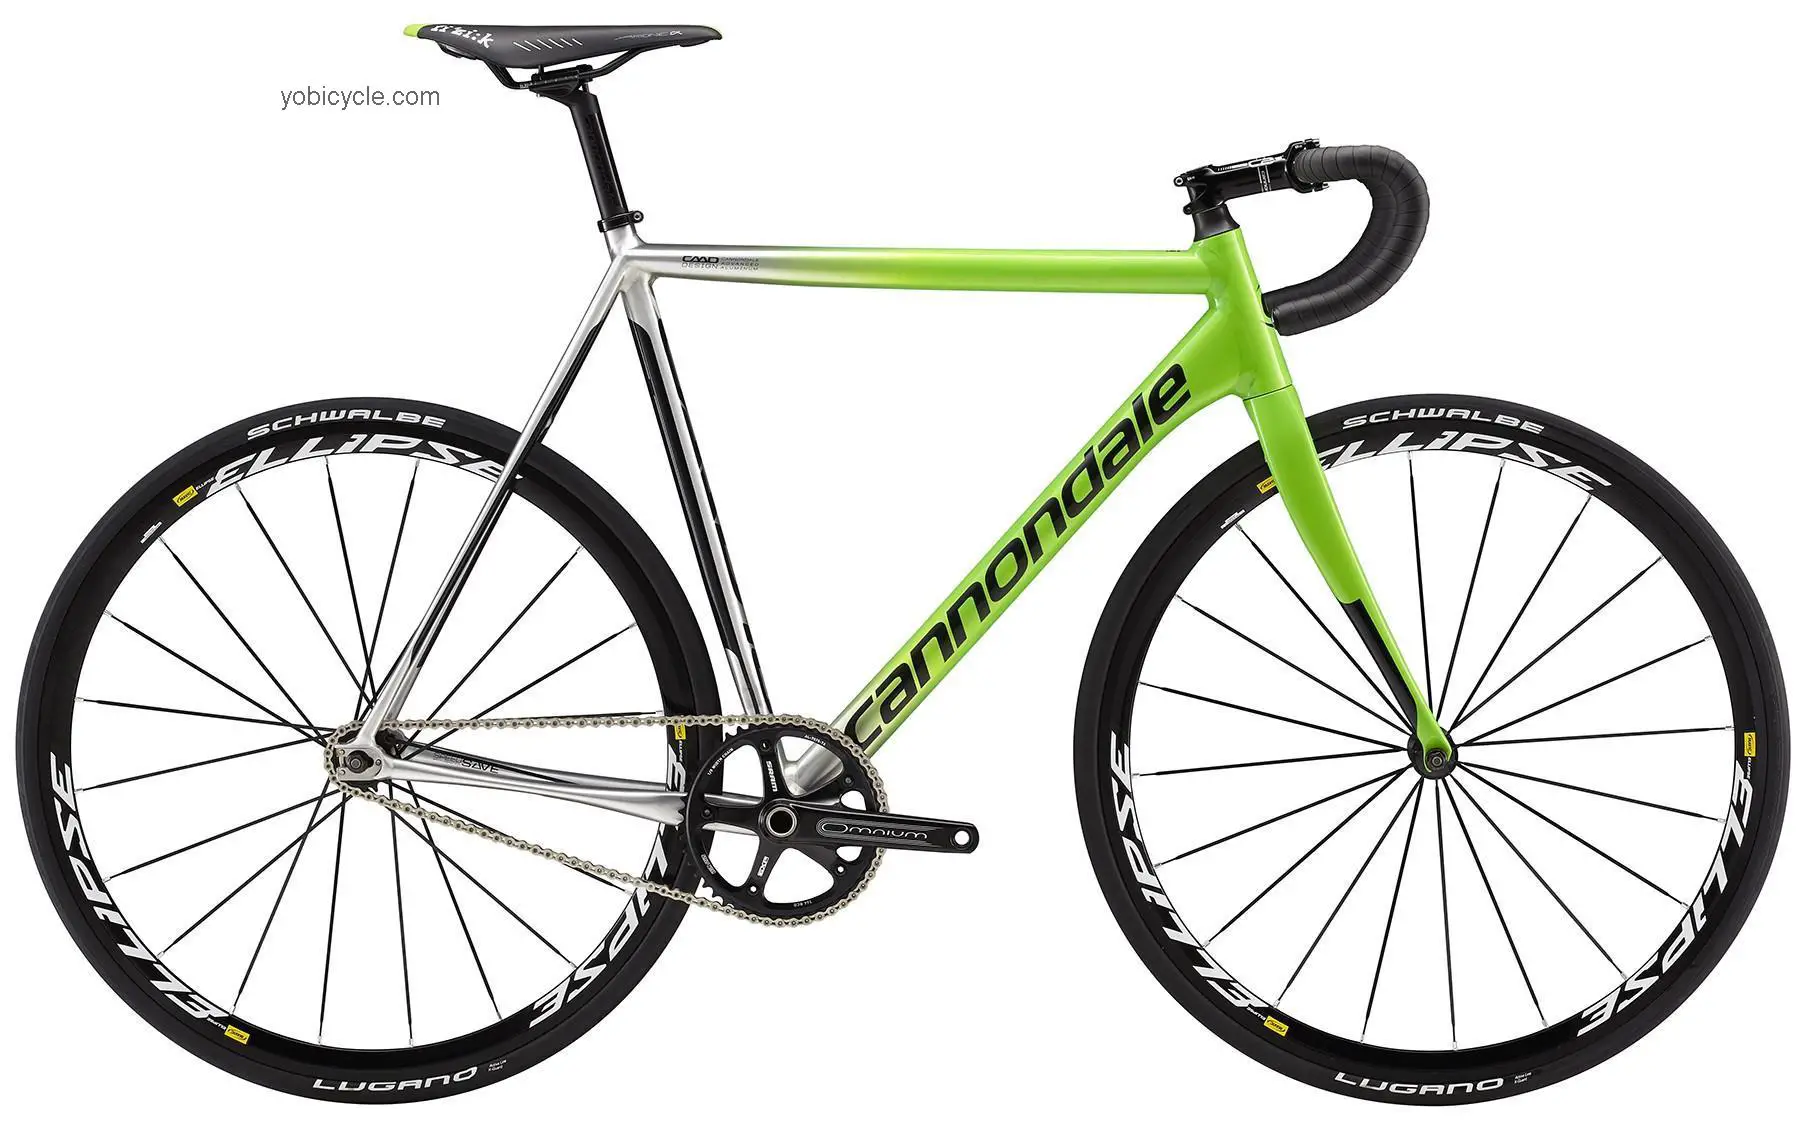 Cannondale CAAD10 TRACK 1 2015 comparison online with competitors